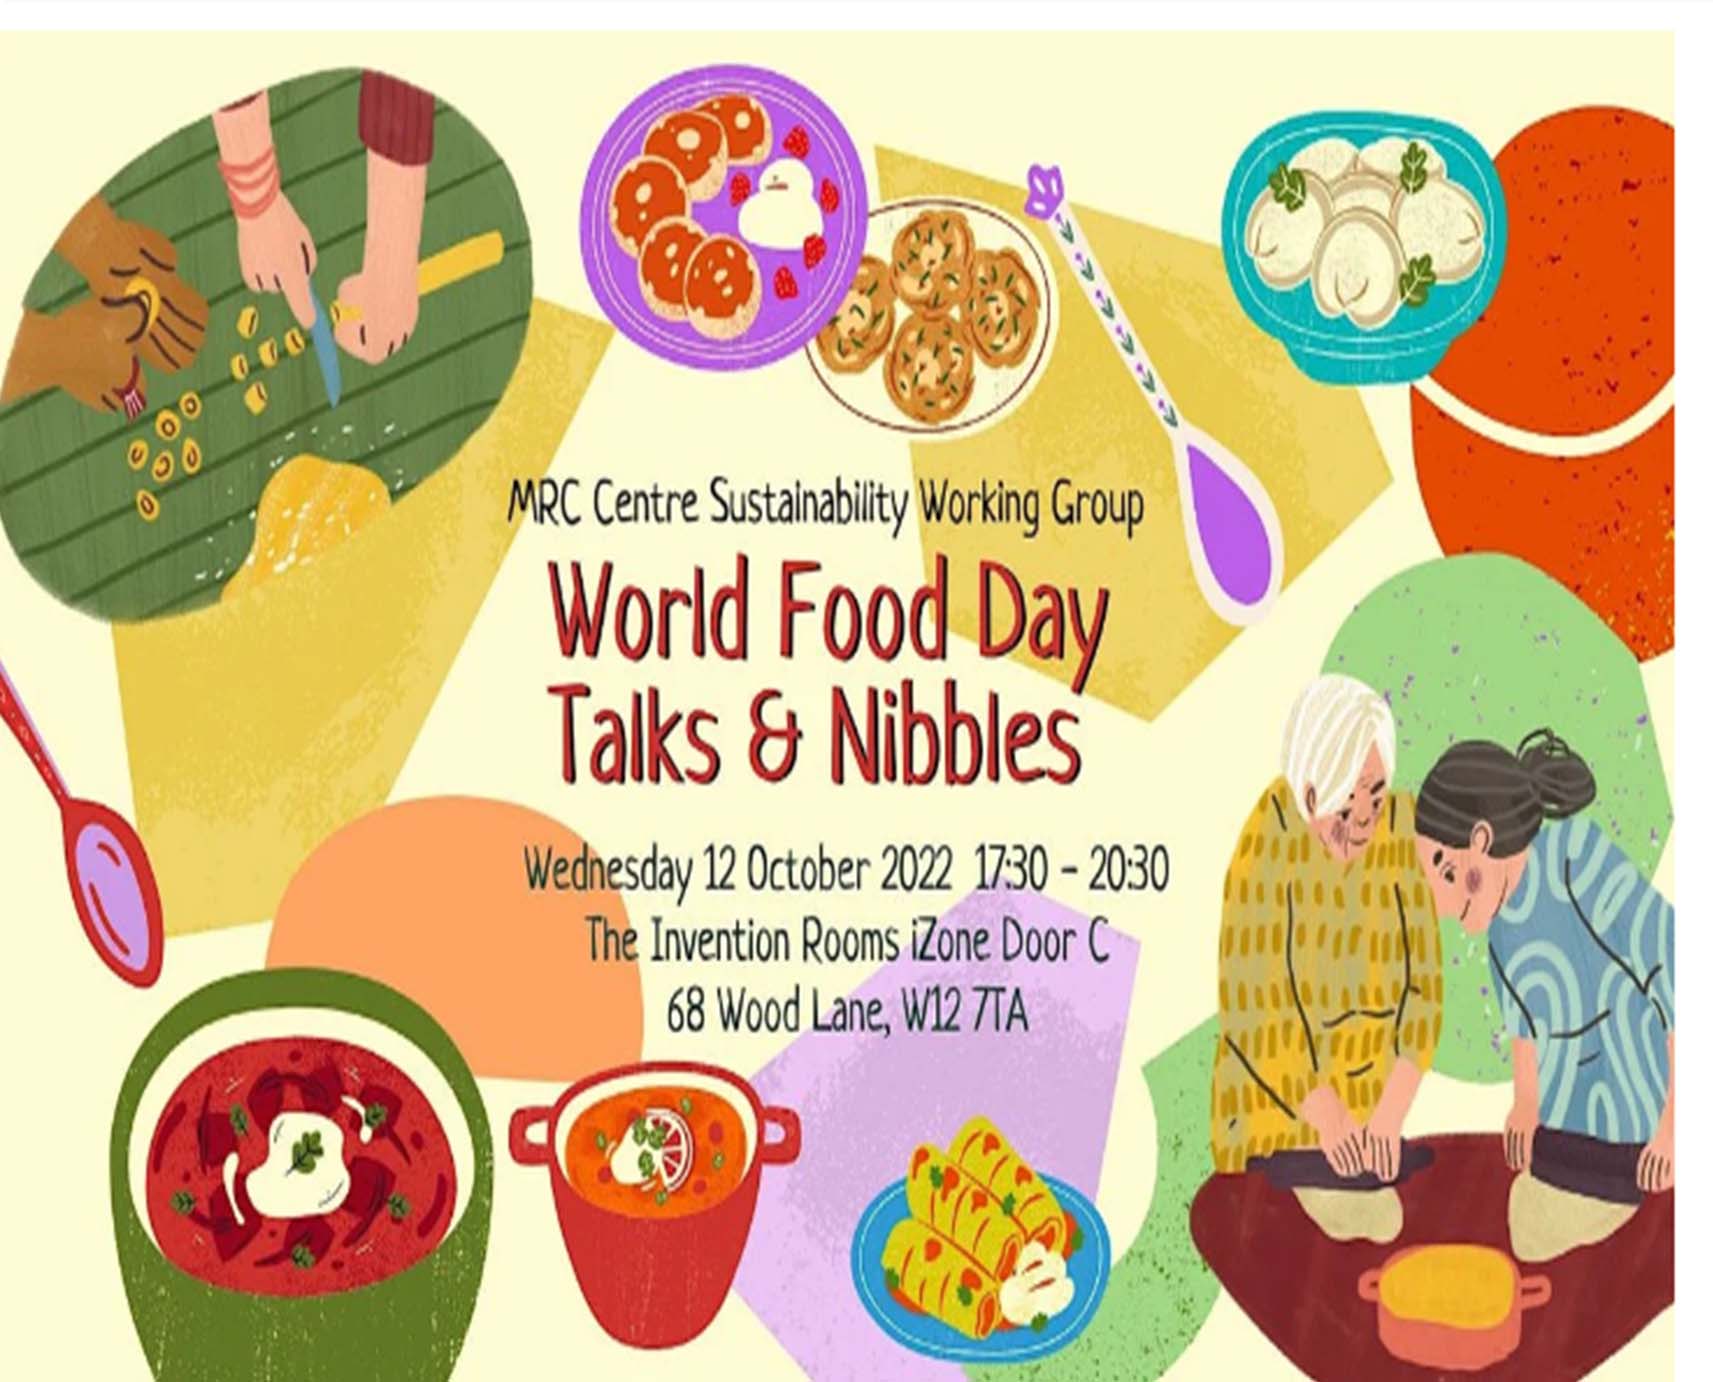 The World Food Day Talks & Nibbles